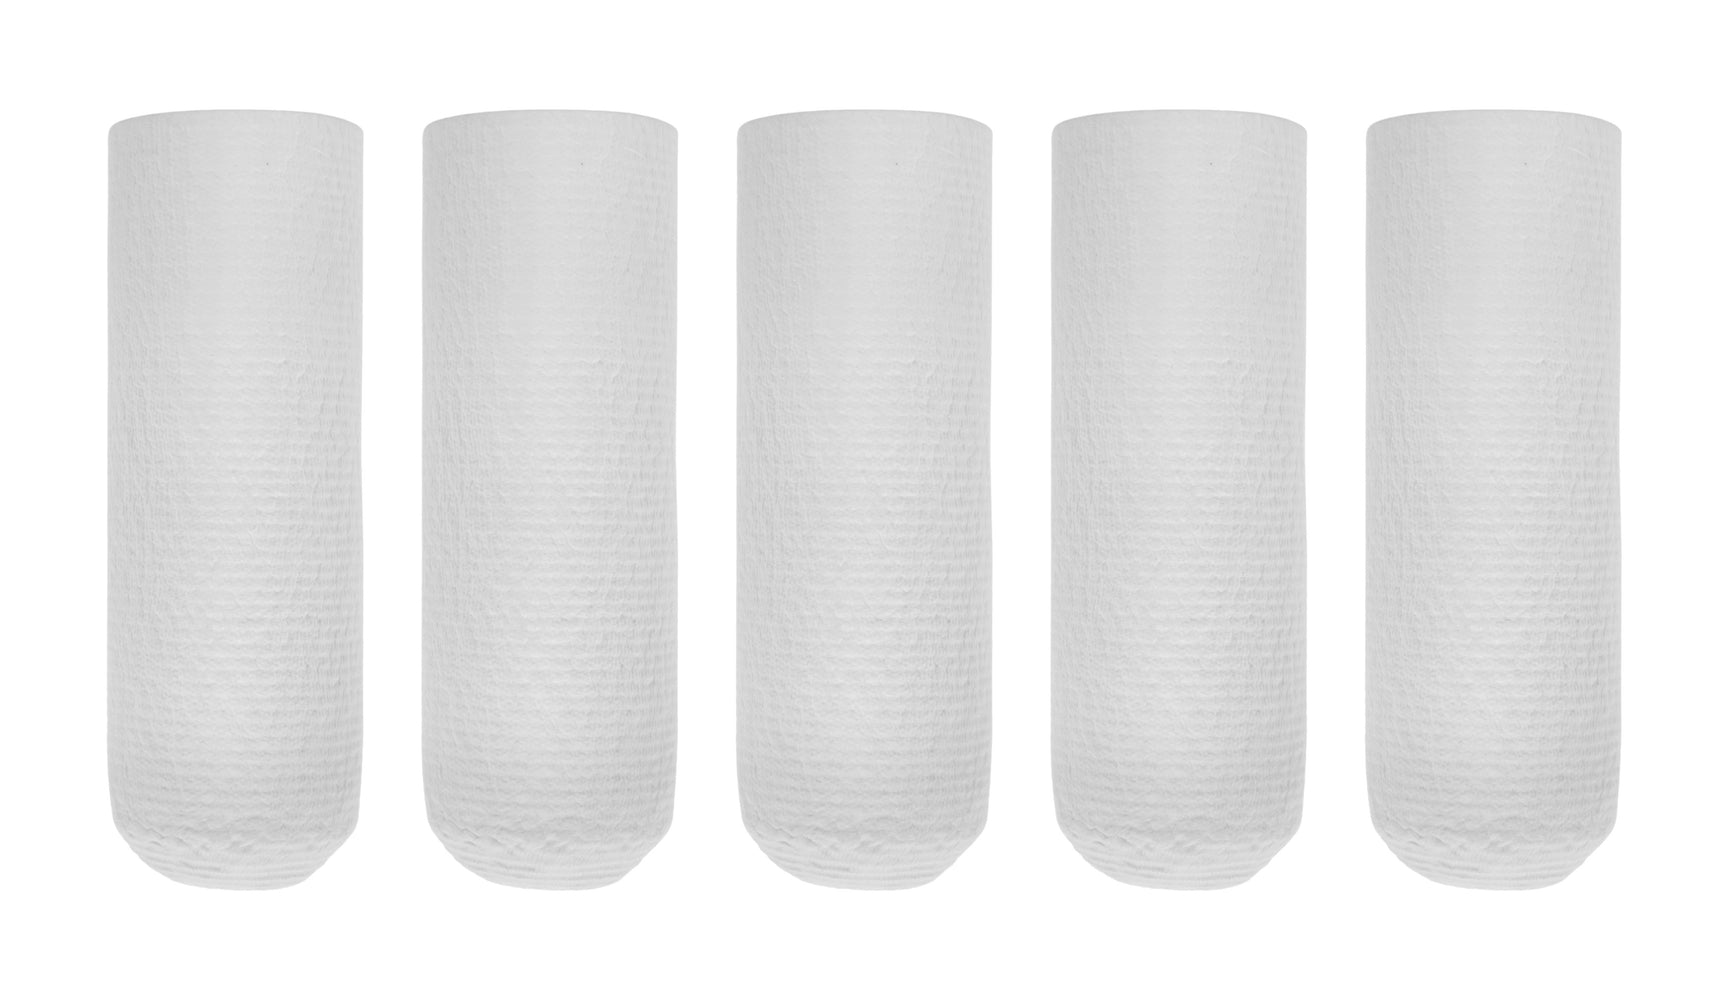 5PK Cellulose Extraction Thimbles, 43mm O.D. x 123mm L - Fits 200mL Soxhlet Extractor CH0888C